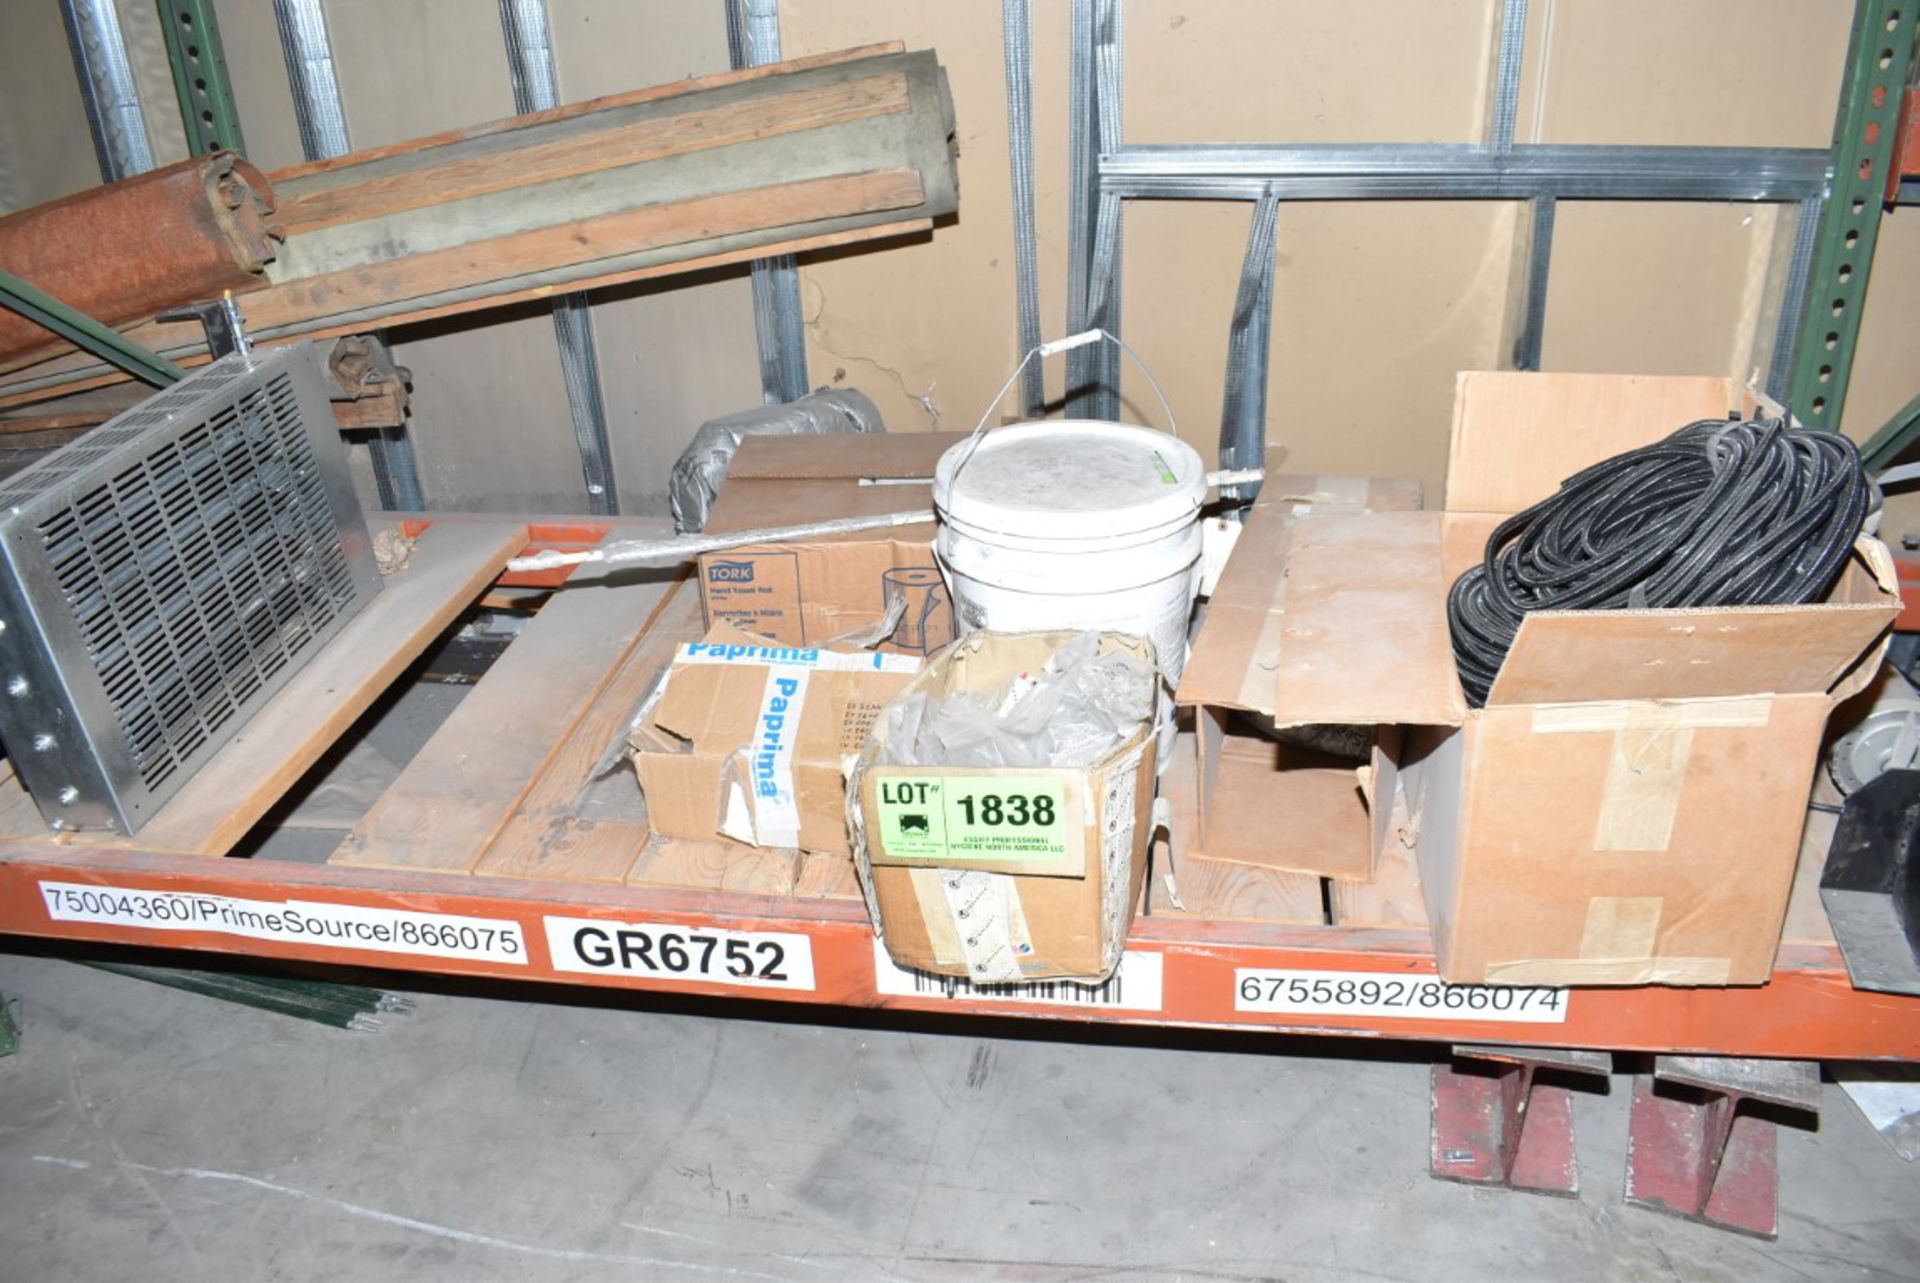 LOT/ CONTENTS OF SHELF - INCLUDING HEATER, SHOP SUPPLIES, ELECTRICAL SUPPLIES [RIGGING FEE FOR